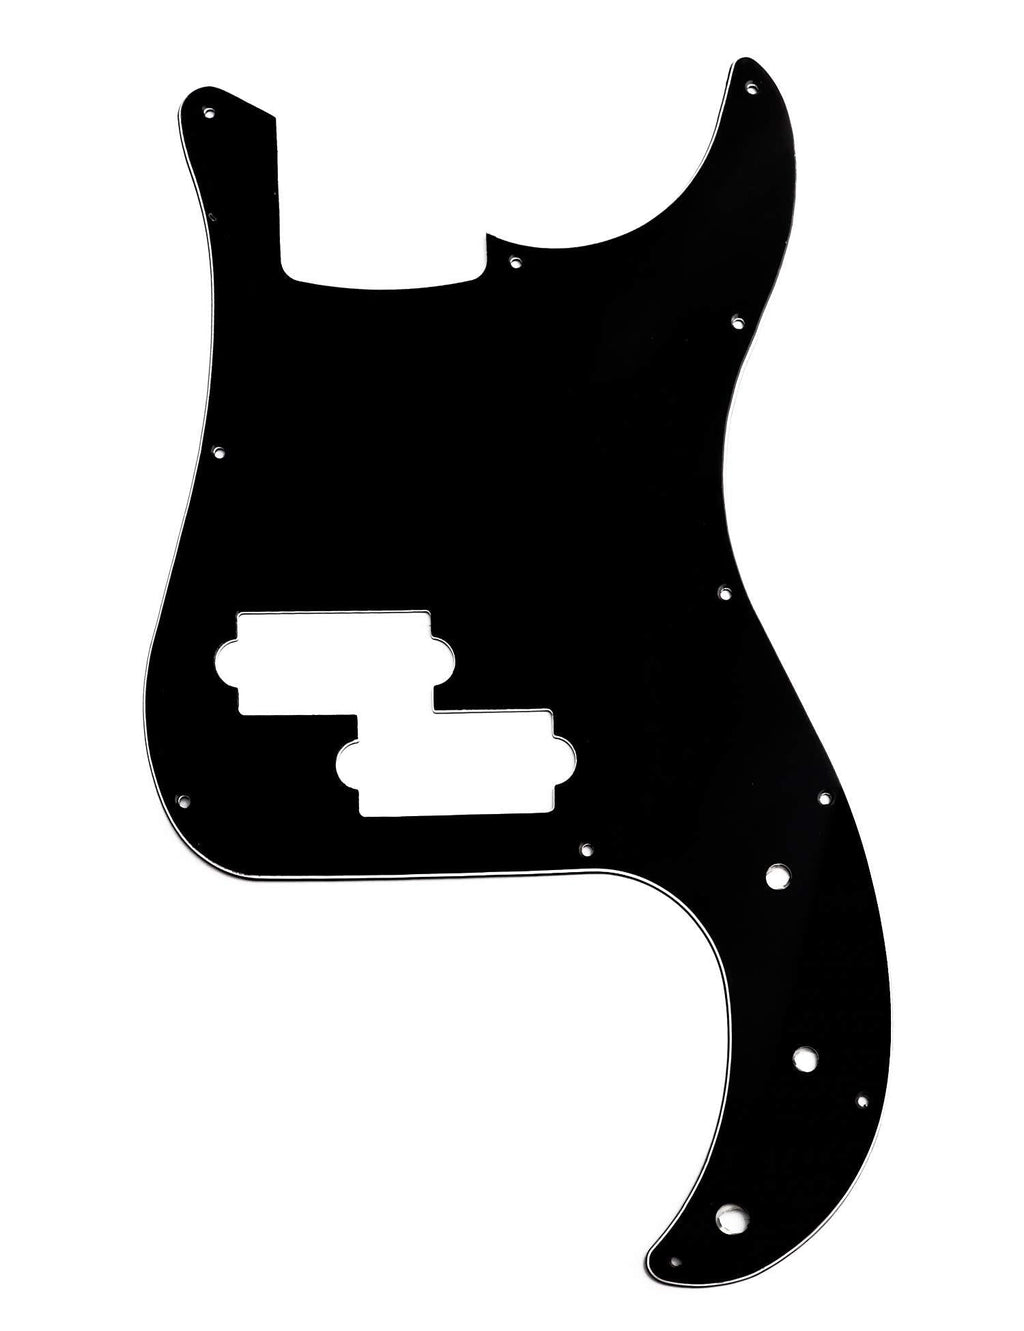 Metallor Electric Guitar Pickguard Scratch Plate 3 Ply 11 holes Compatible with Precision Bass PB Bass P Bass Black.